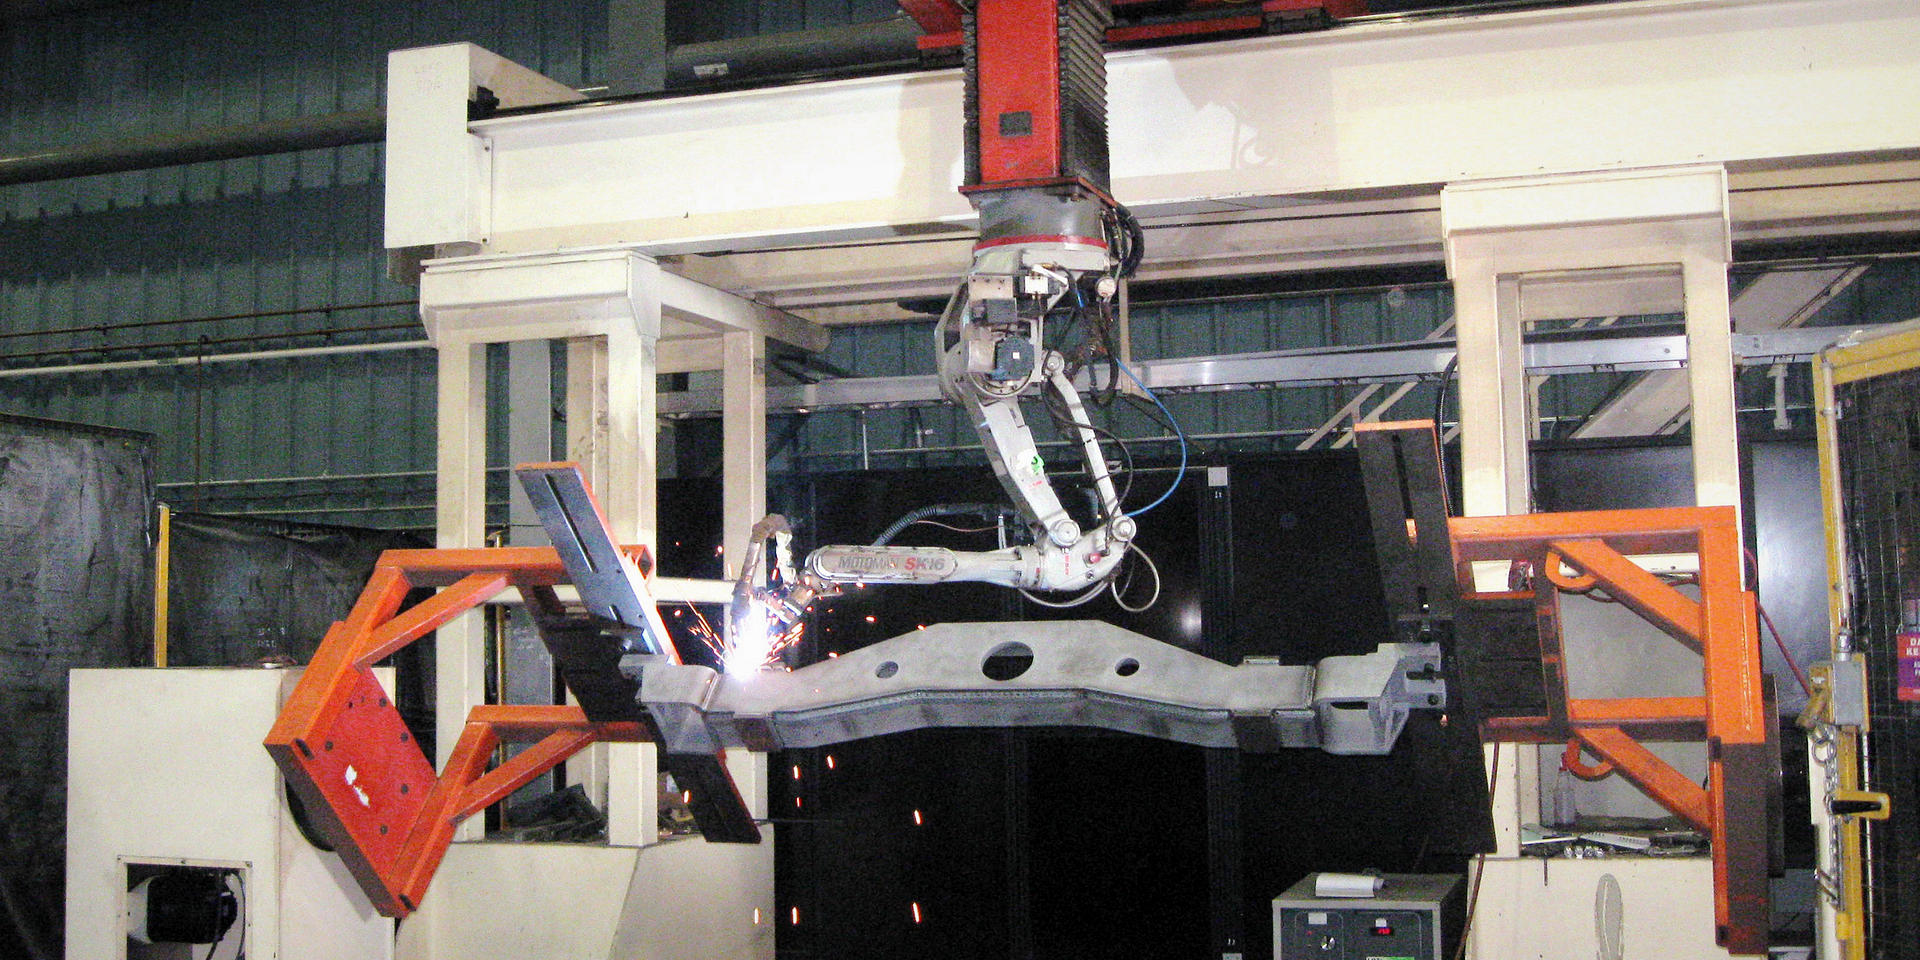 Steering beam being welded by large welding robot at Piper Lane location.